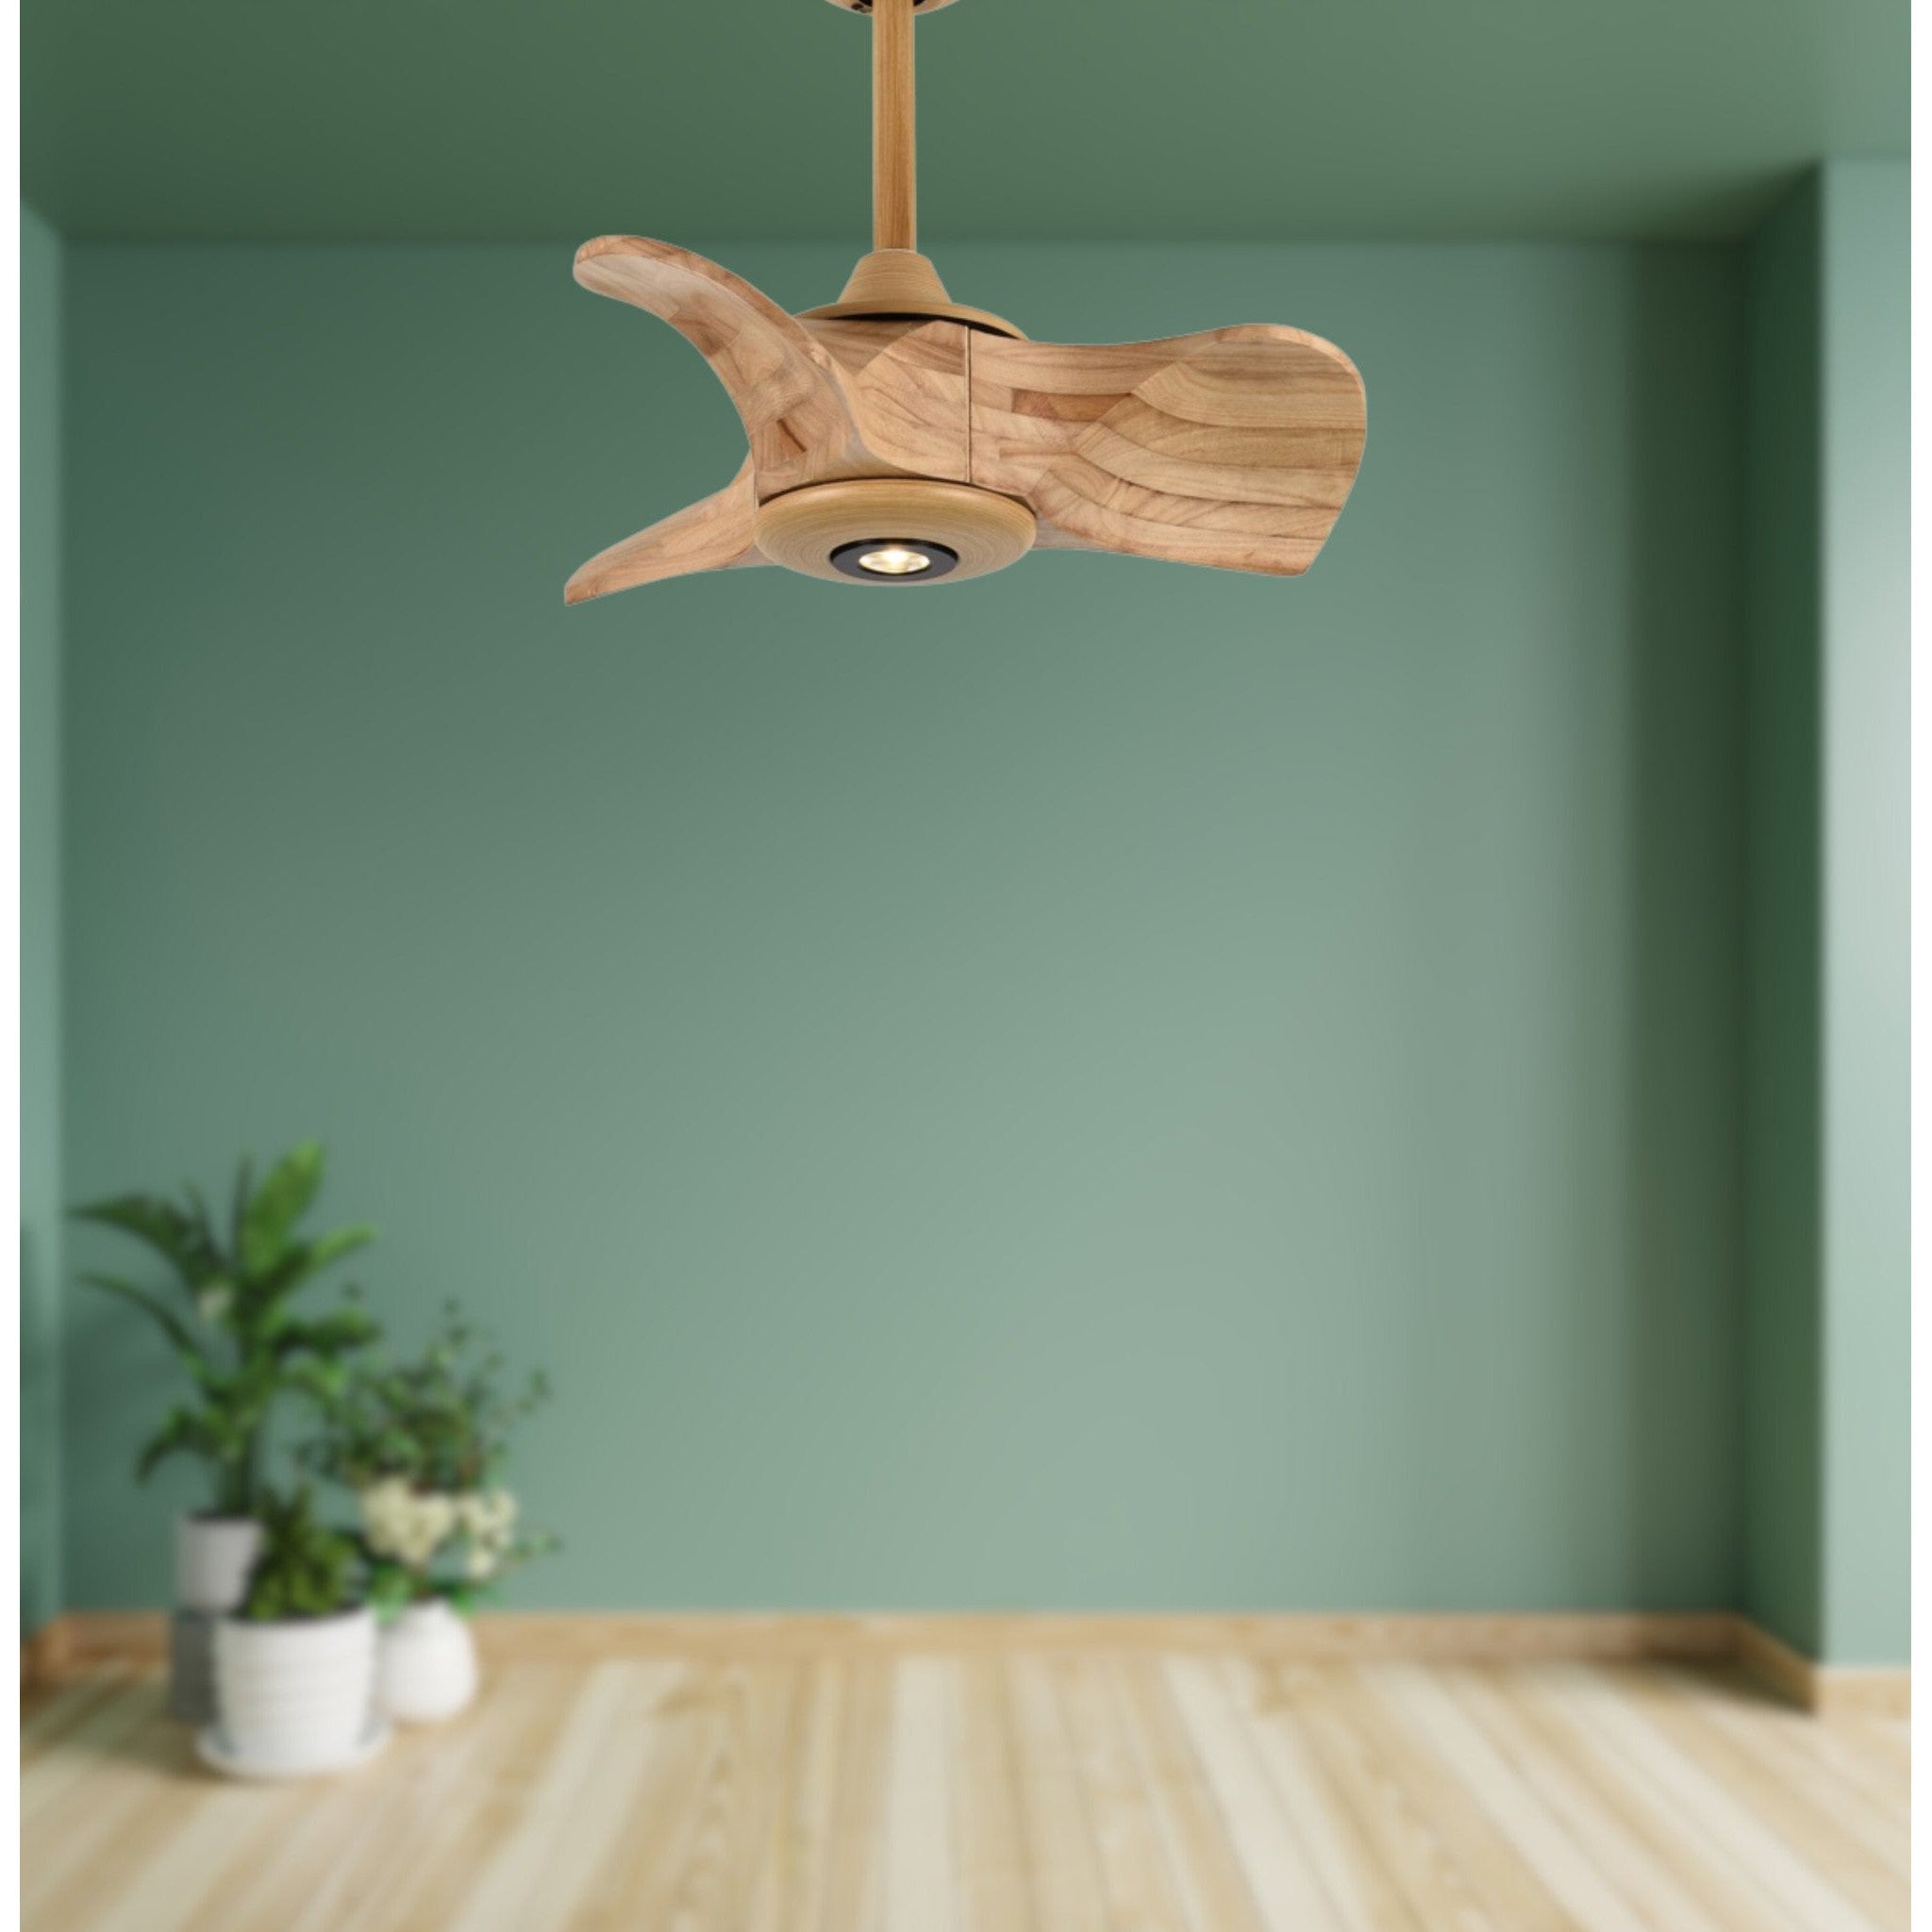 Todays Fans Mini Ceiling Fan 22" with 3 Solid Wood Blades and LED spotlight - Image 1